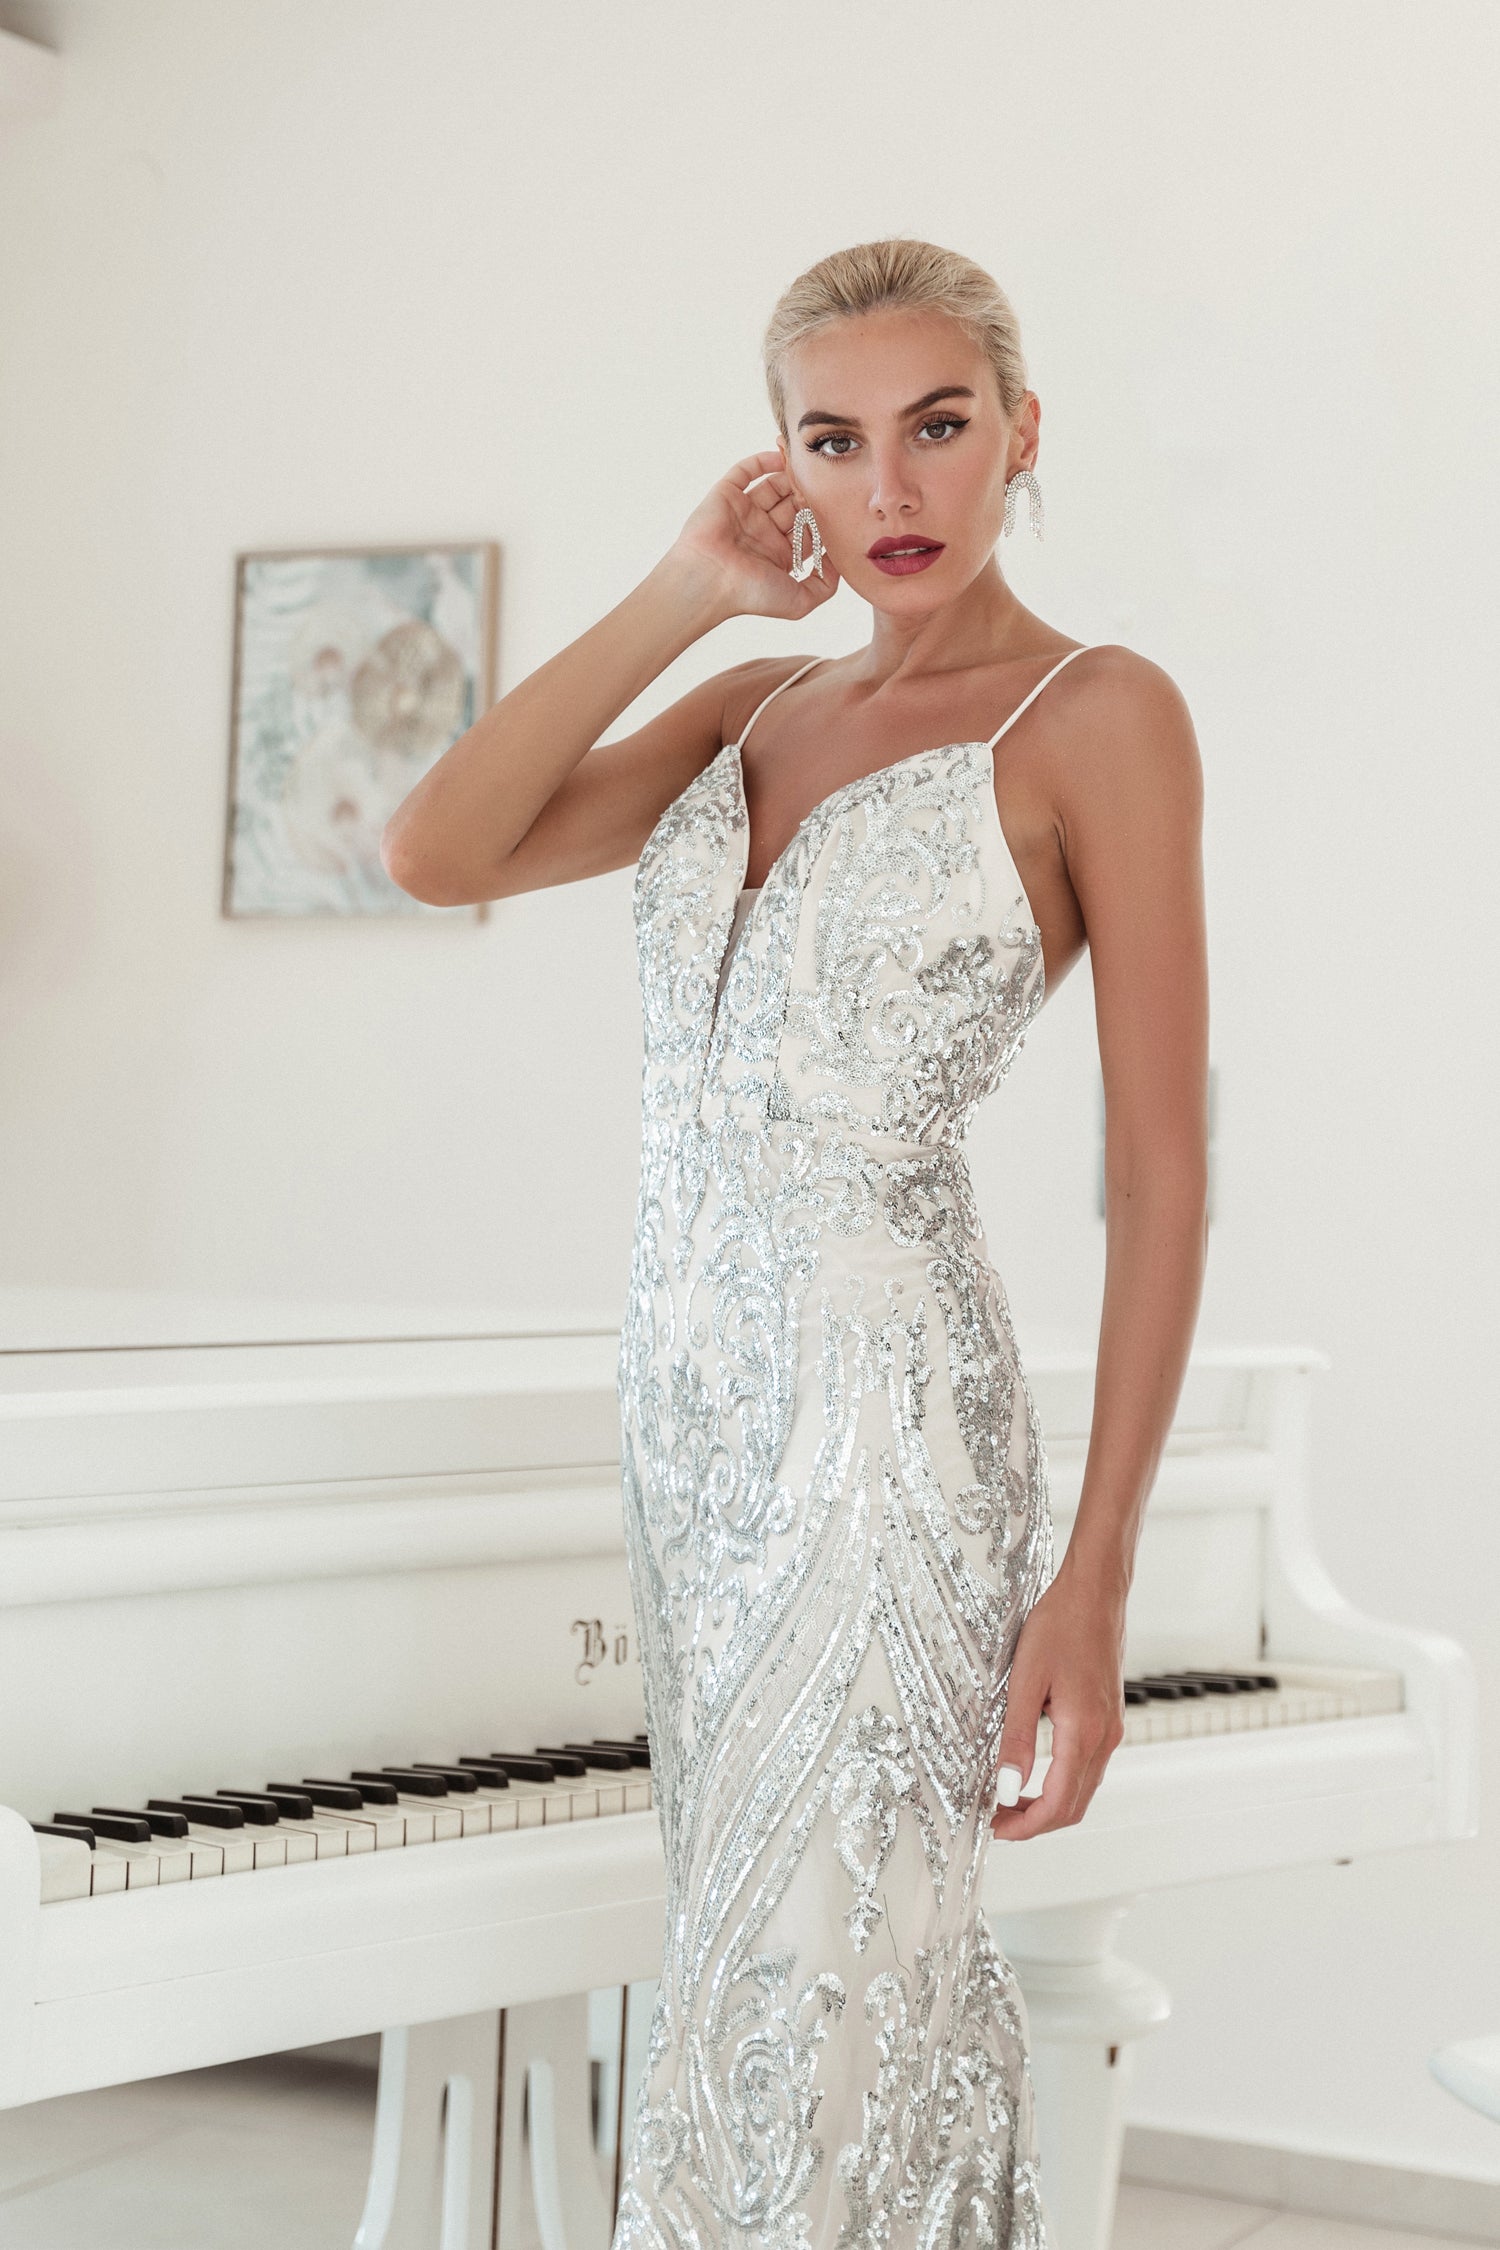 Tina Holly Couture BA666 Silver Sequin Overlay With A Deep V Neckline Mermaid Formal Dress